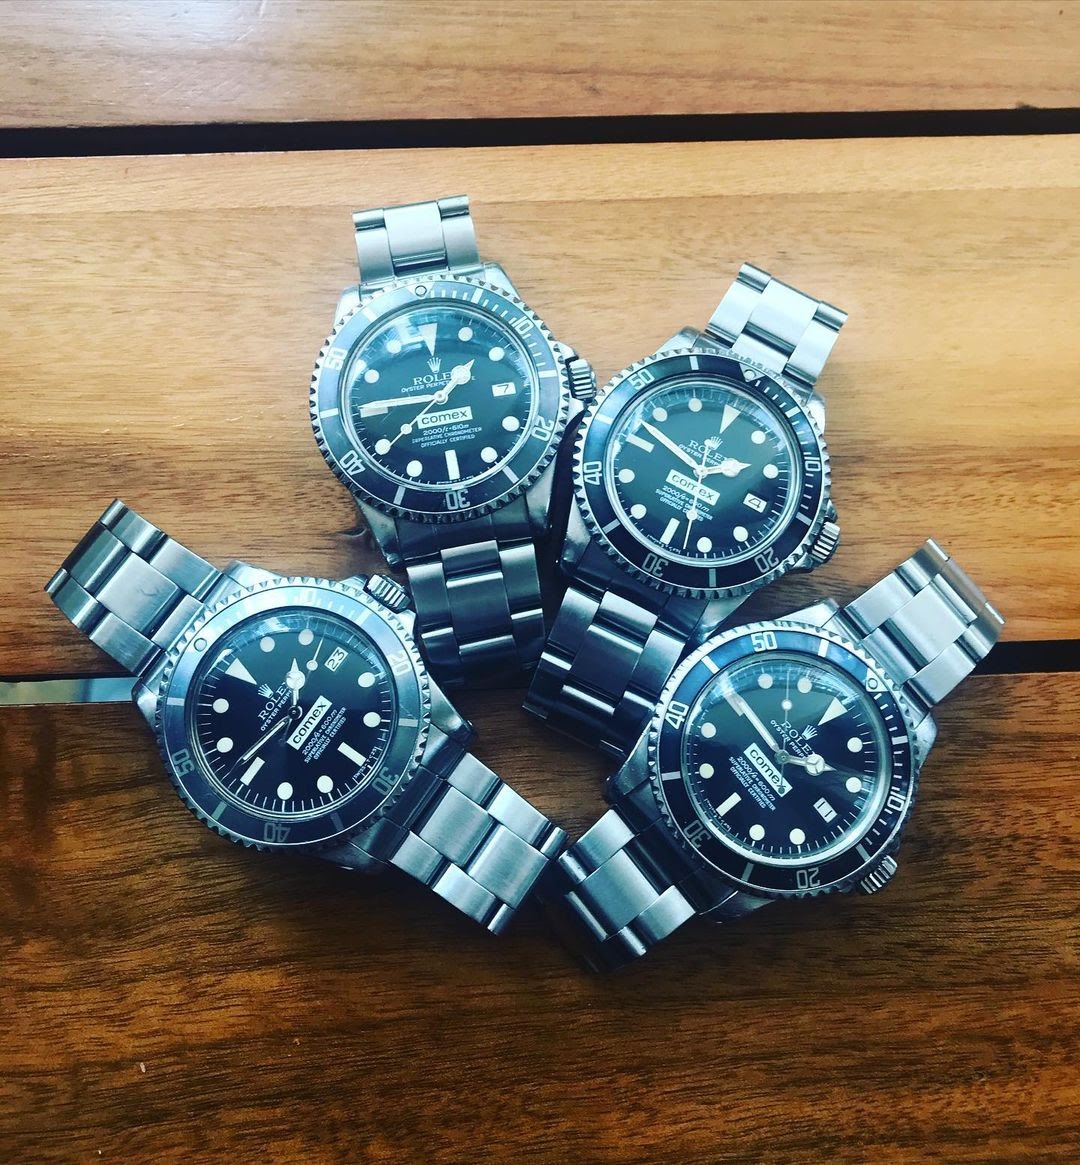 4 Rolex submariners special edition